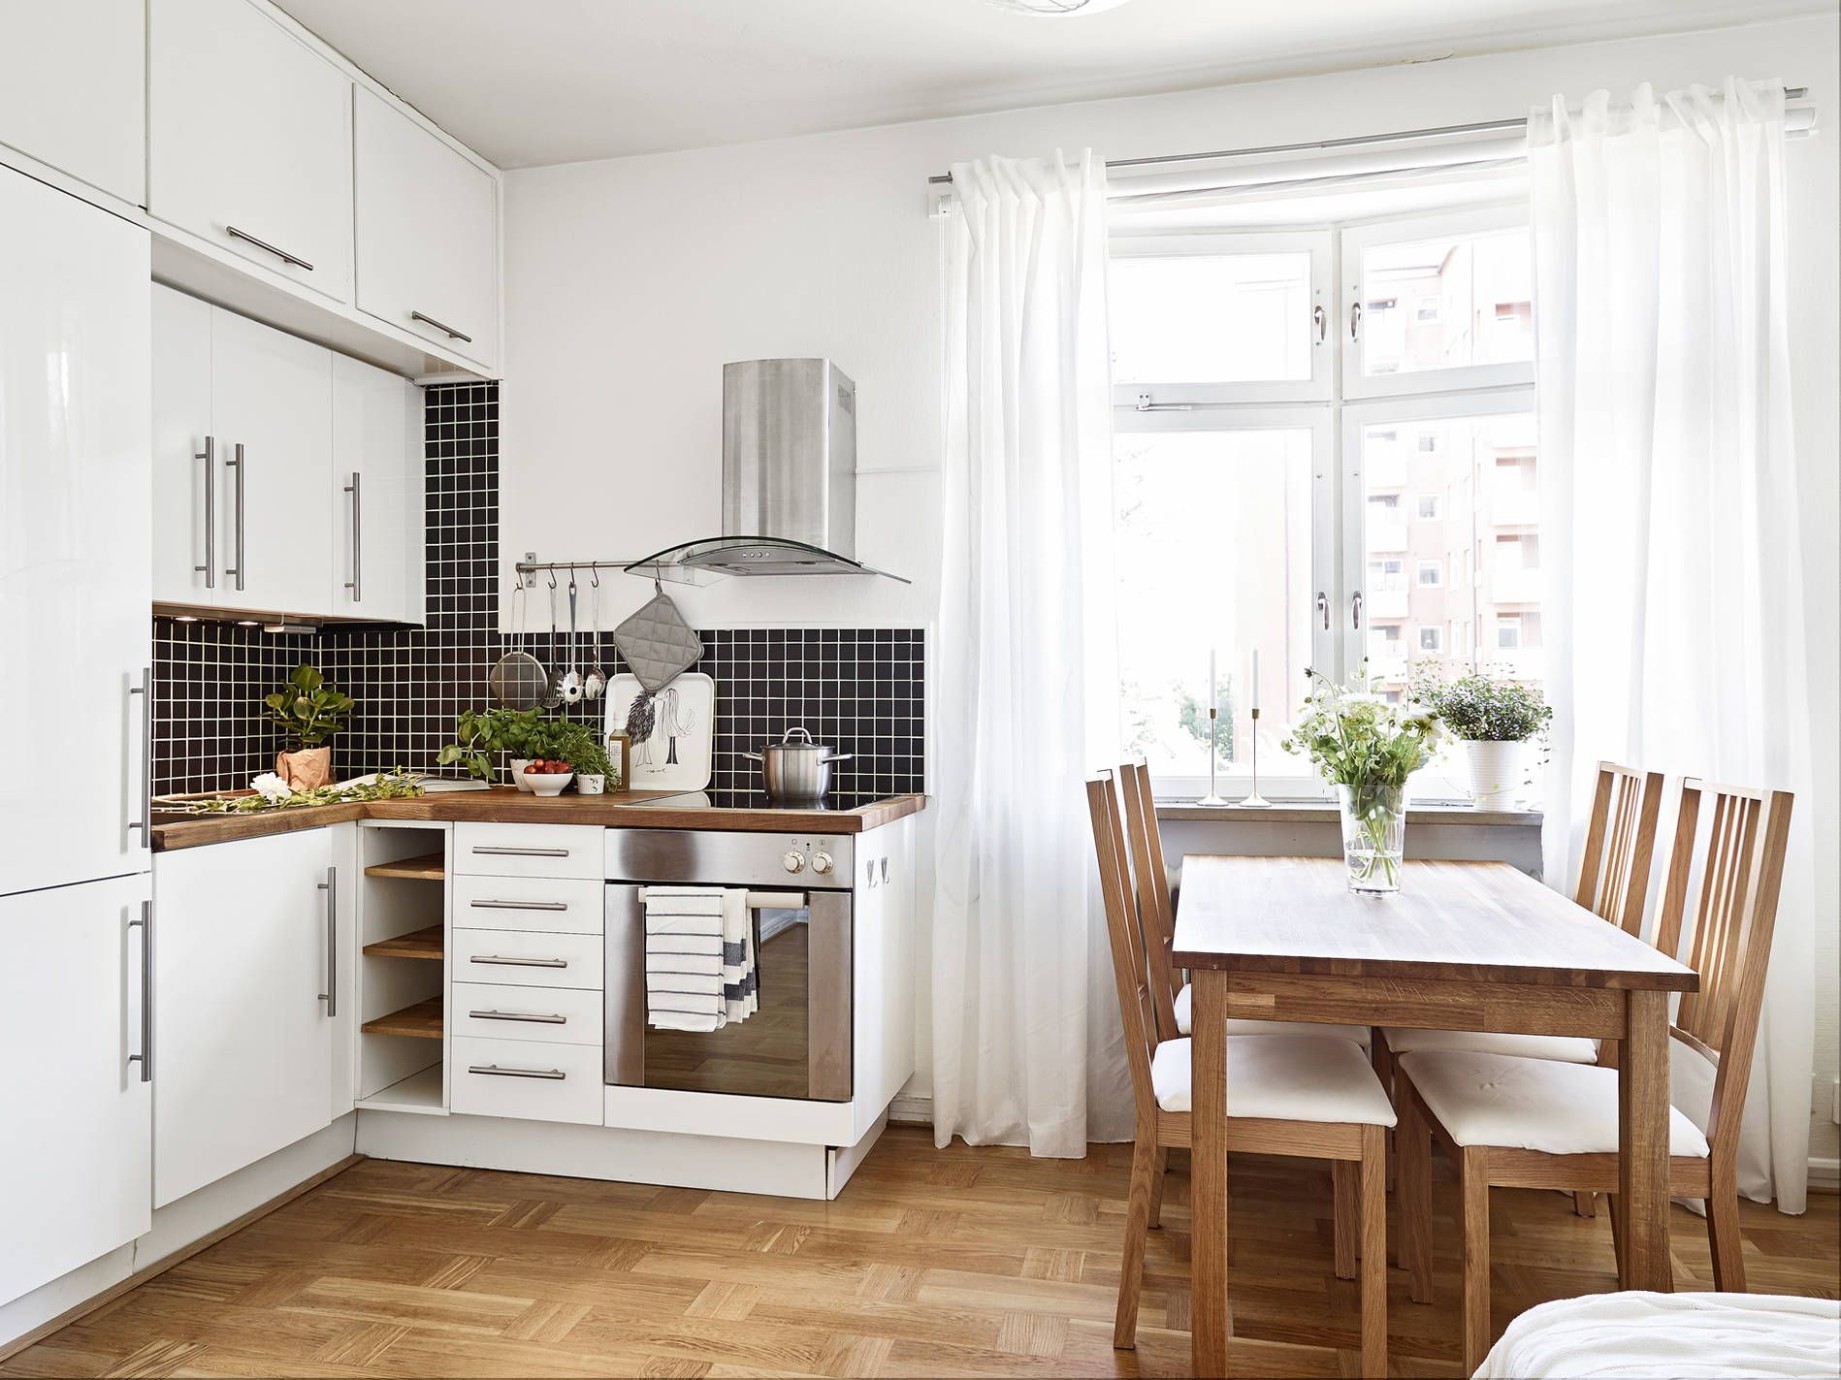 5 Space-Making Hacks for Small Kitchens - what is the best way to build a small kitchen?